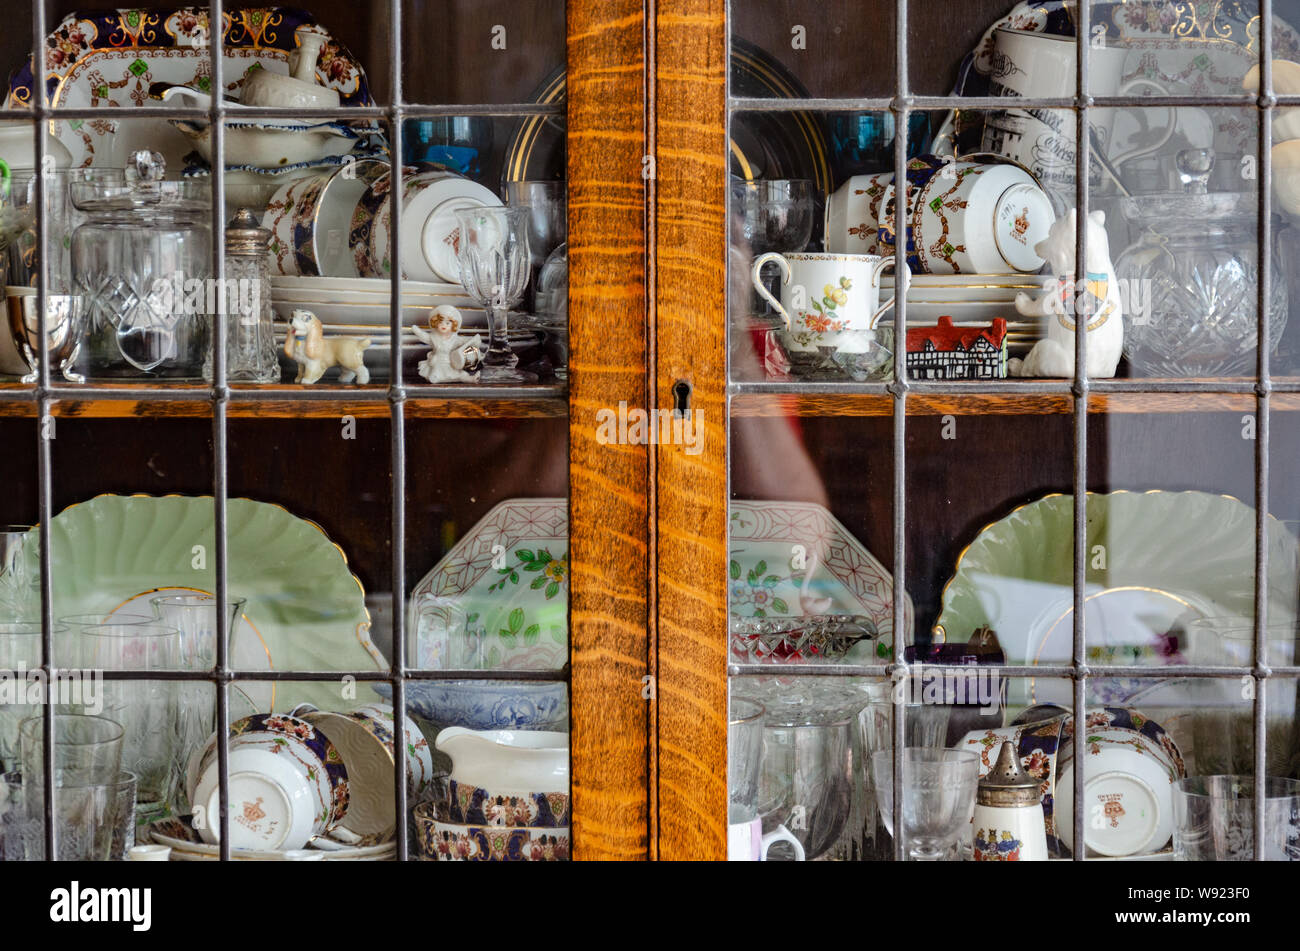 Close up view of plates, cups, saucers and collectables on a shelf in a glass display cabinet. Stock Photo